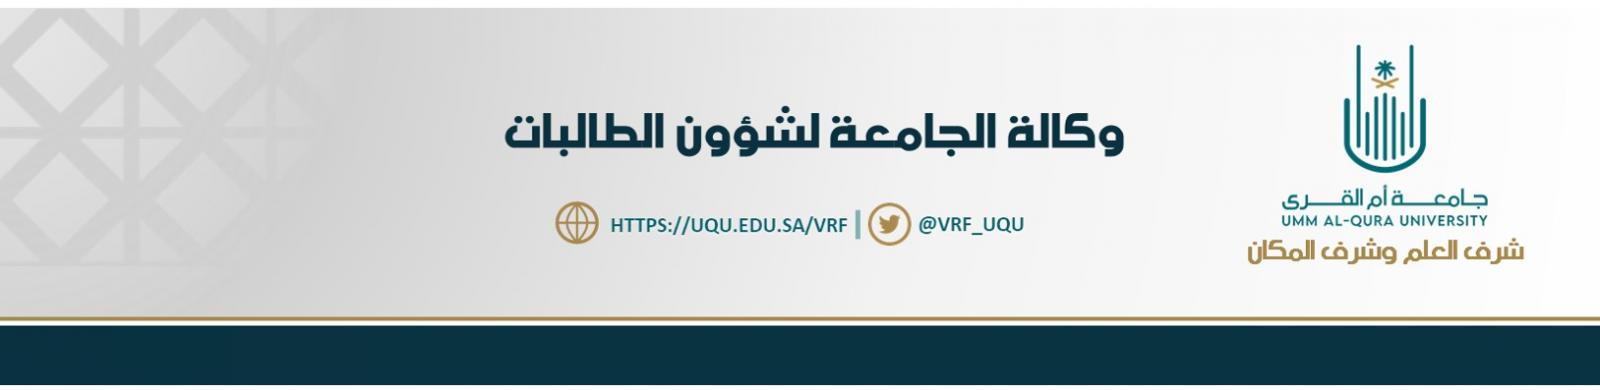 UQU Vice Presidency for Female Students